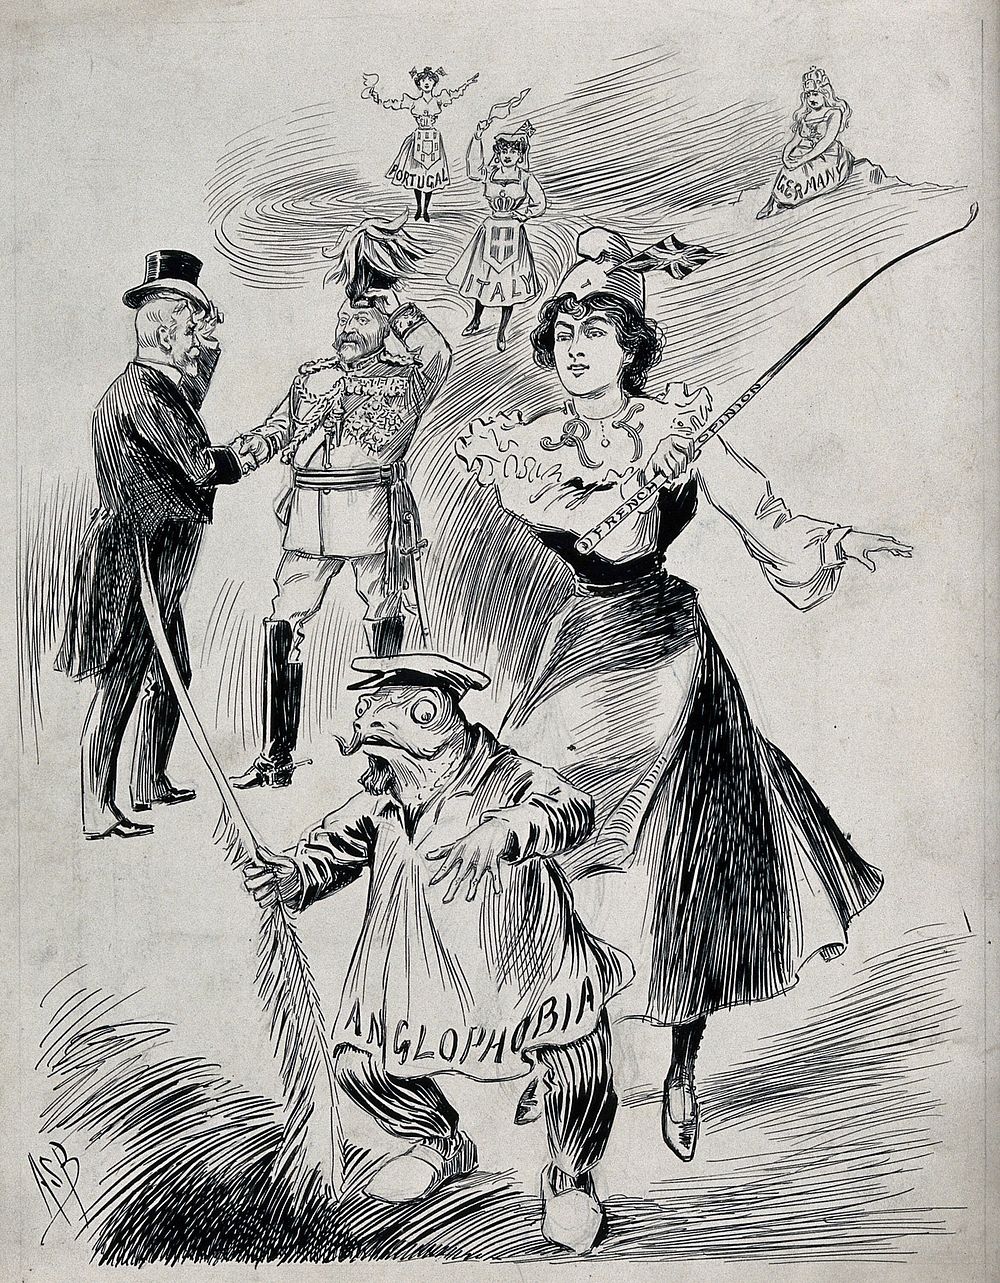 The Entente Cordiale: Marianne (a woman representing France) is chasing away a frog on which is written "Anglophobia"; King…